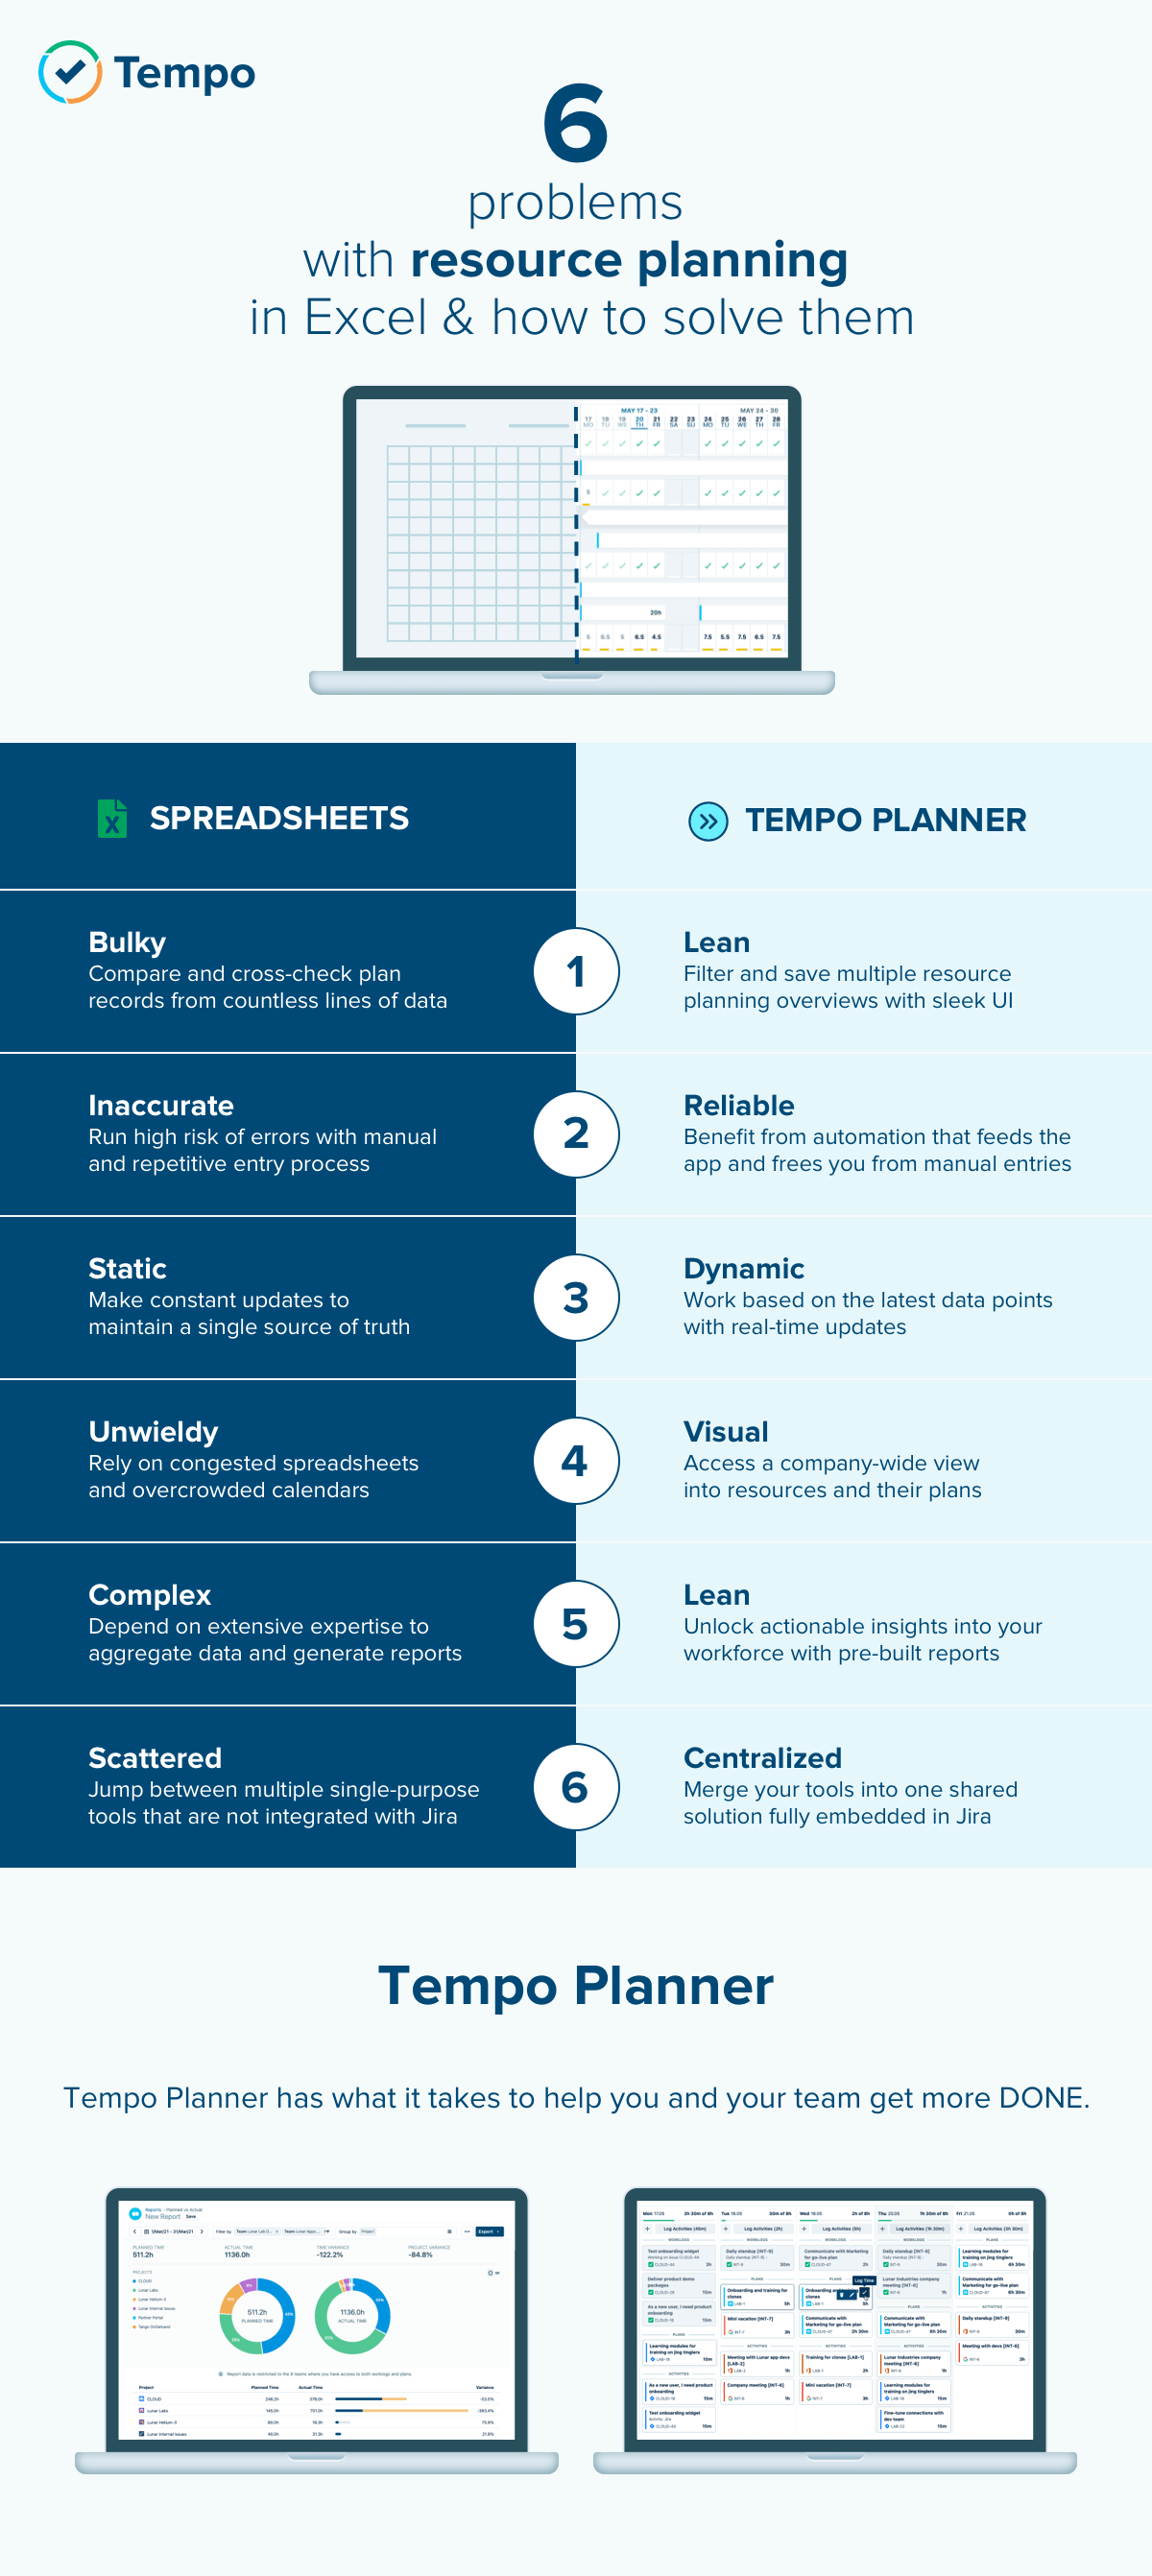 Tempo Planner Resource Planning VS Excel - Infographic